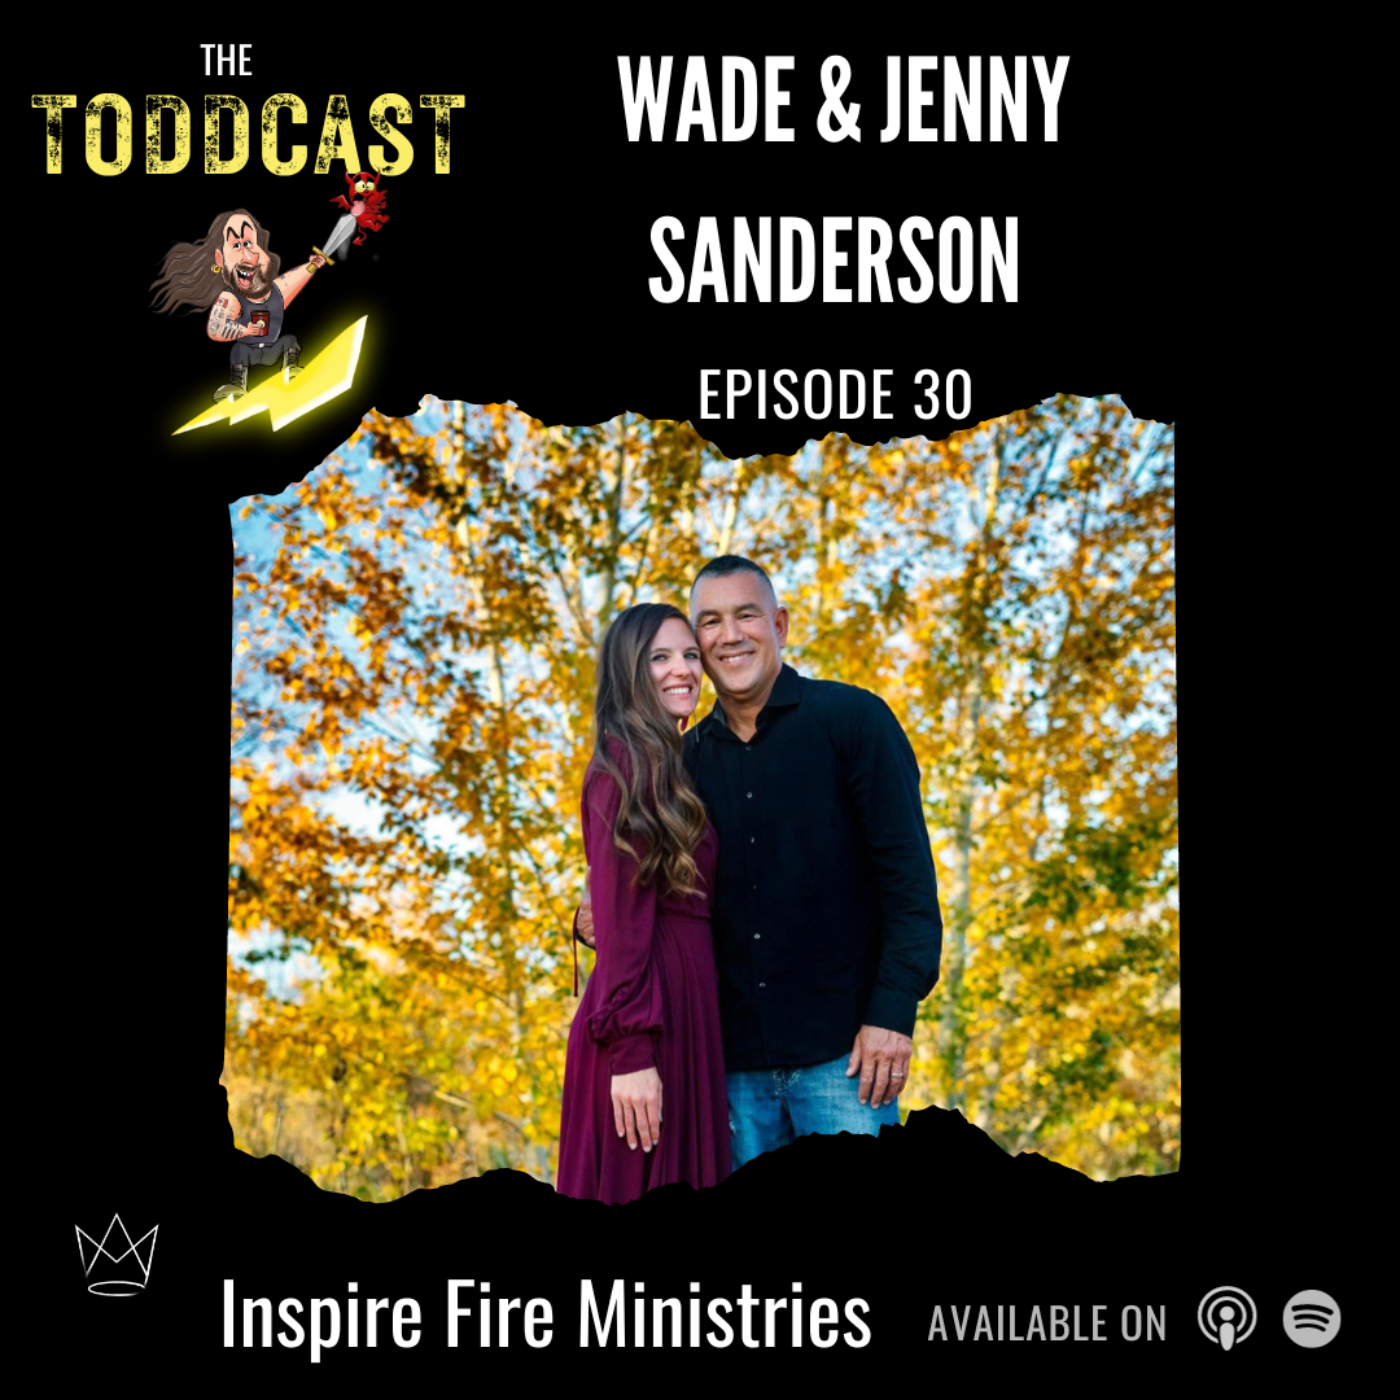 The Toddcast - Wade & Jenny Sanderson (Inspire Fire Ministries)